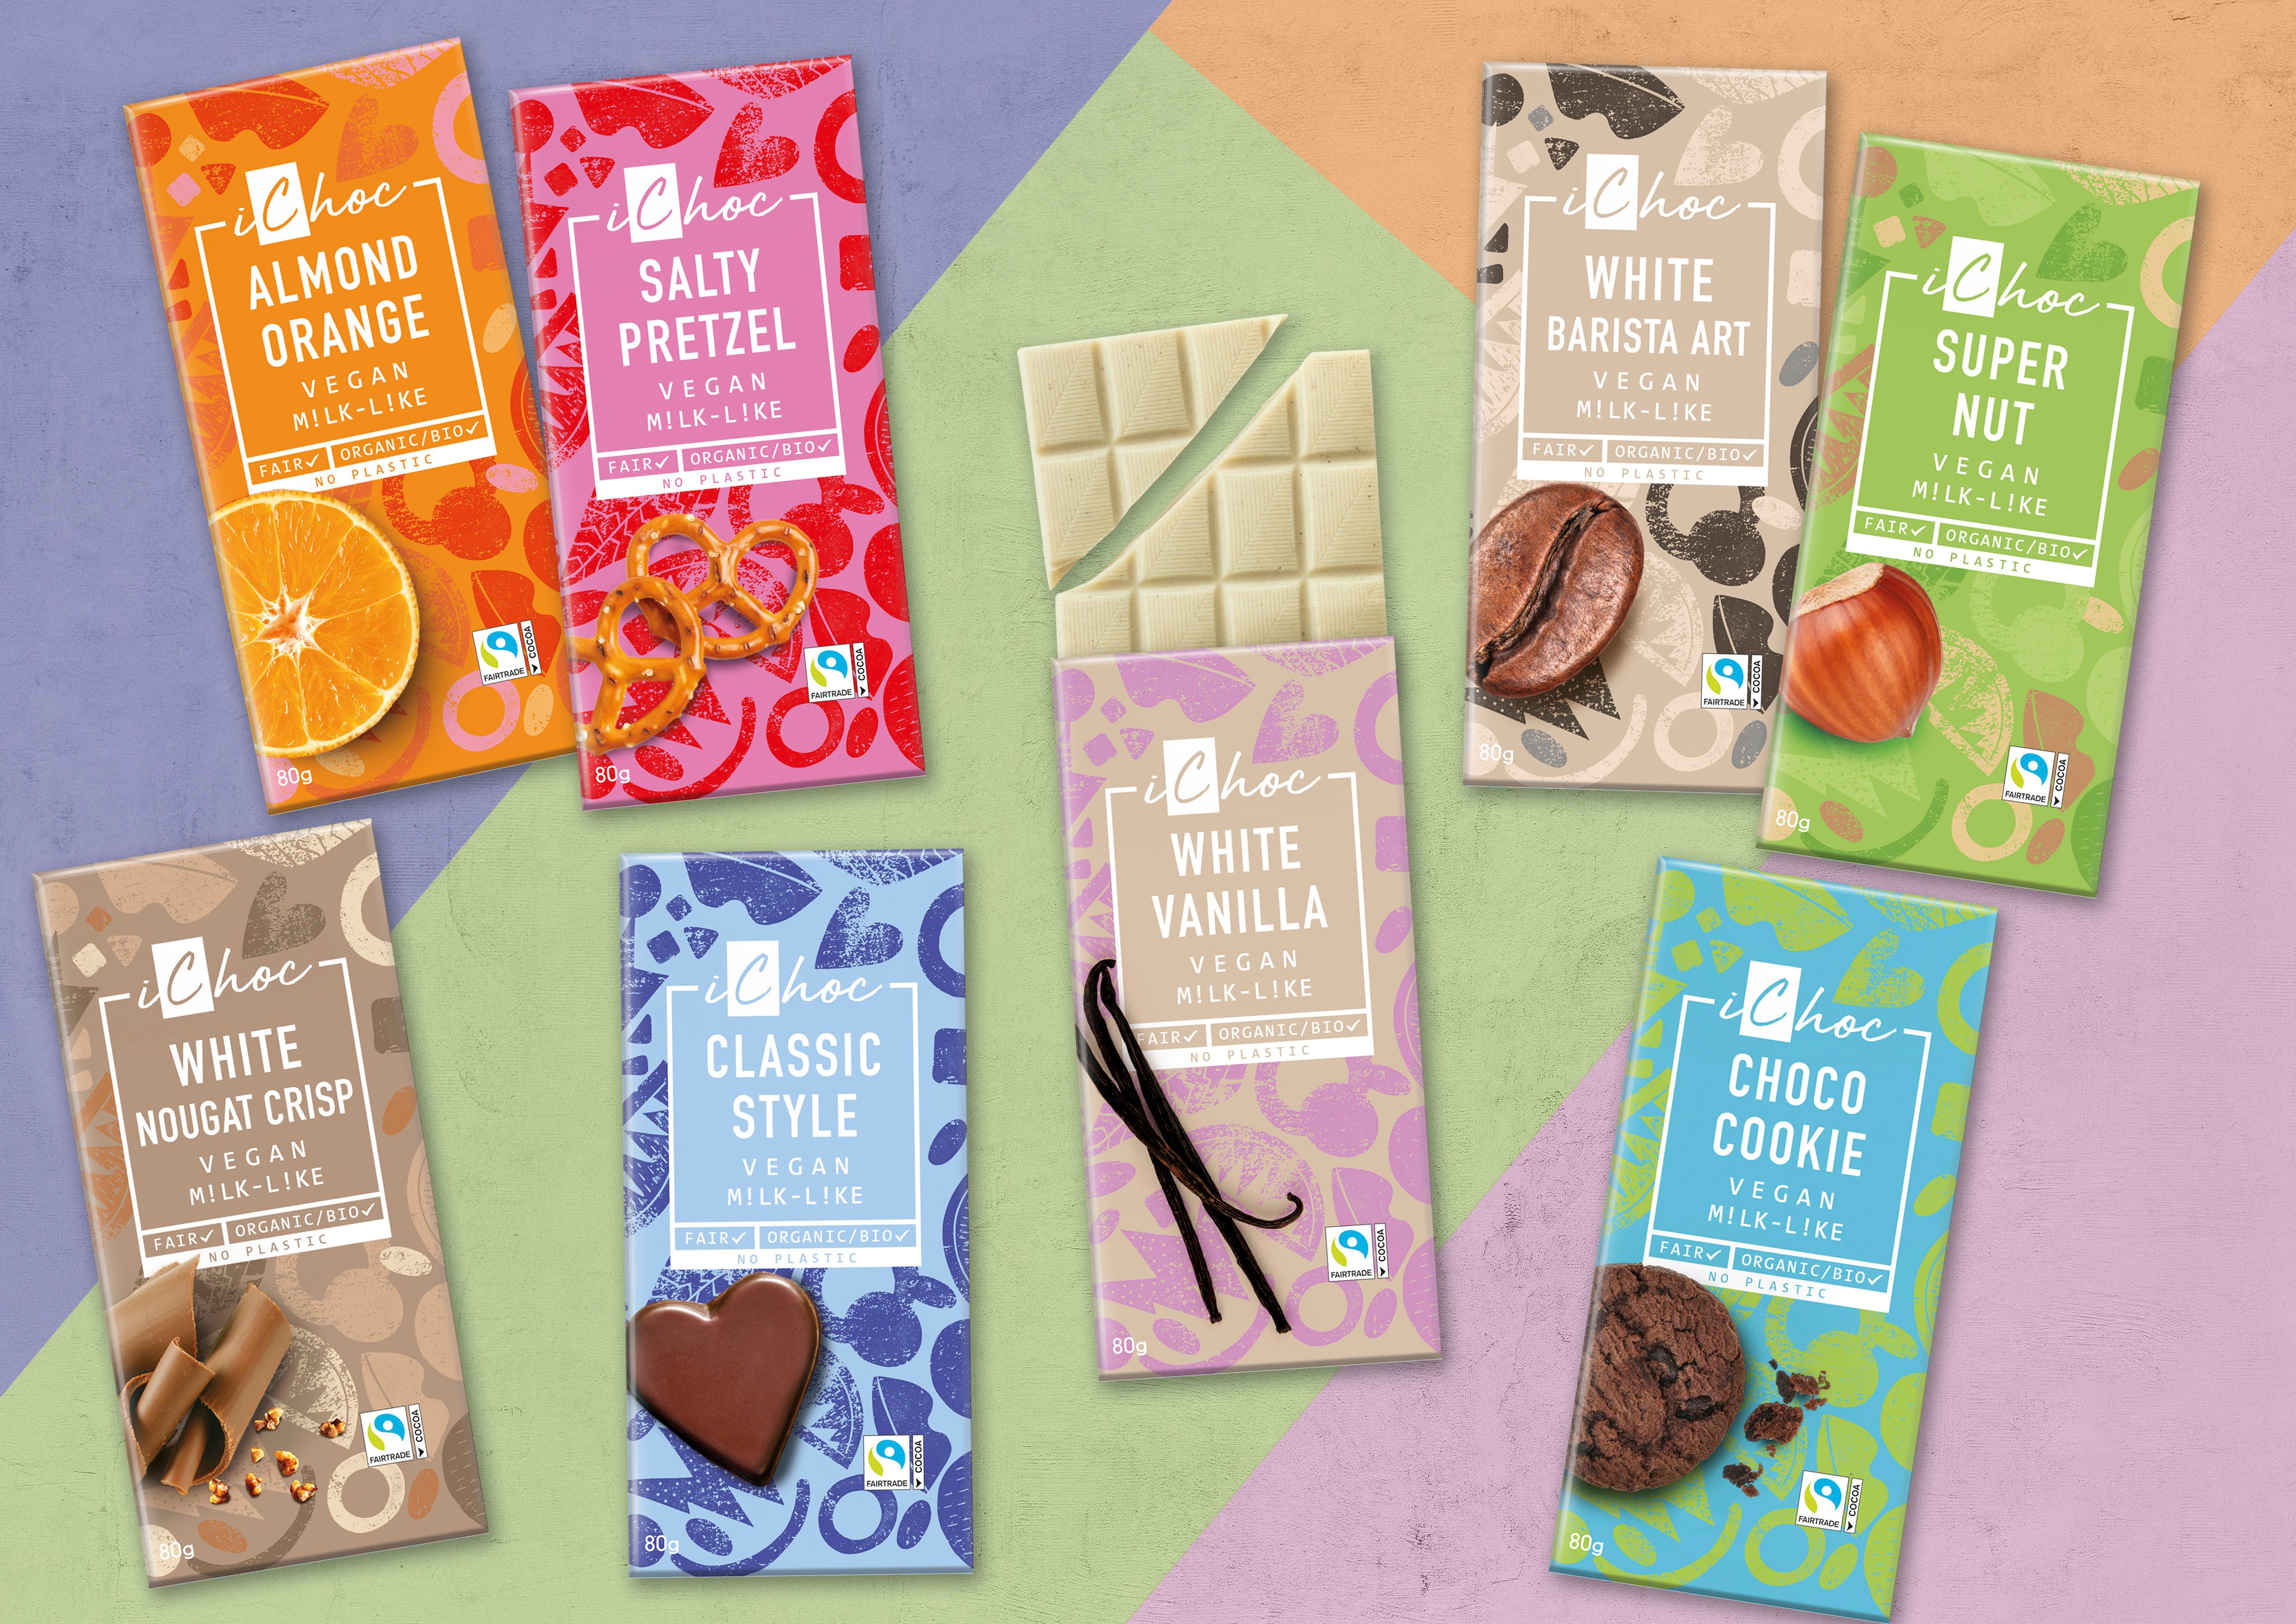 Brand Organic to showcase unique and disruptive brands at Speciality & Fine Food Fair 2022